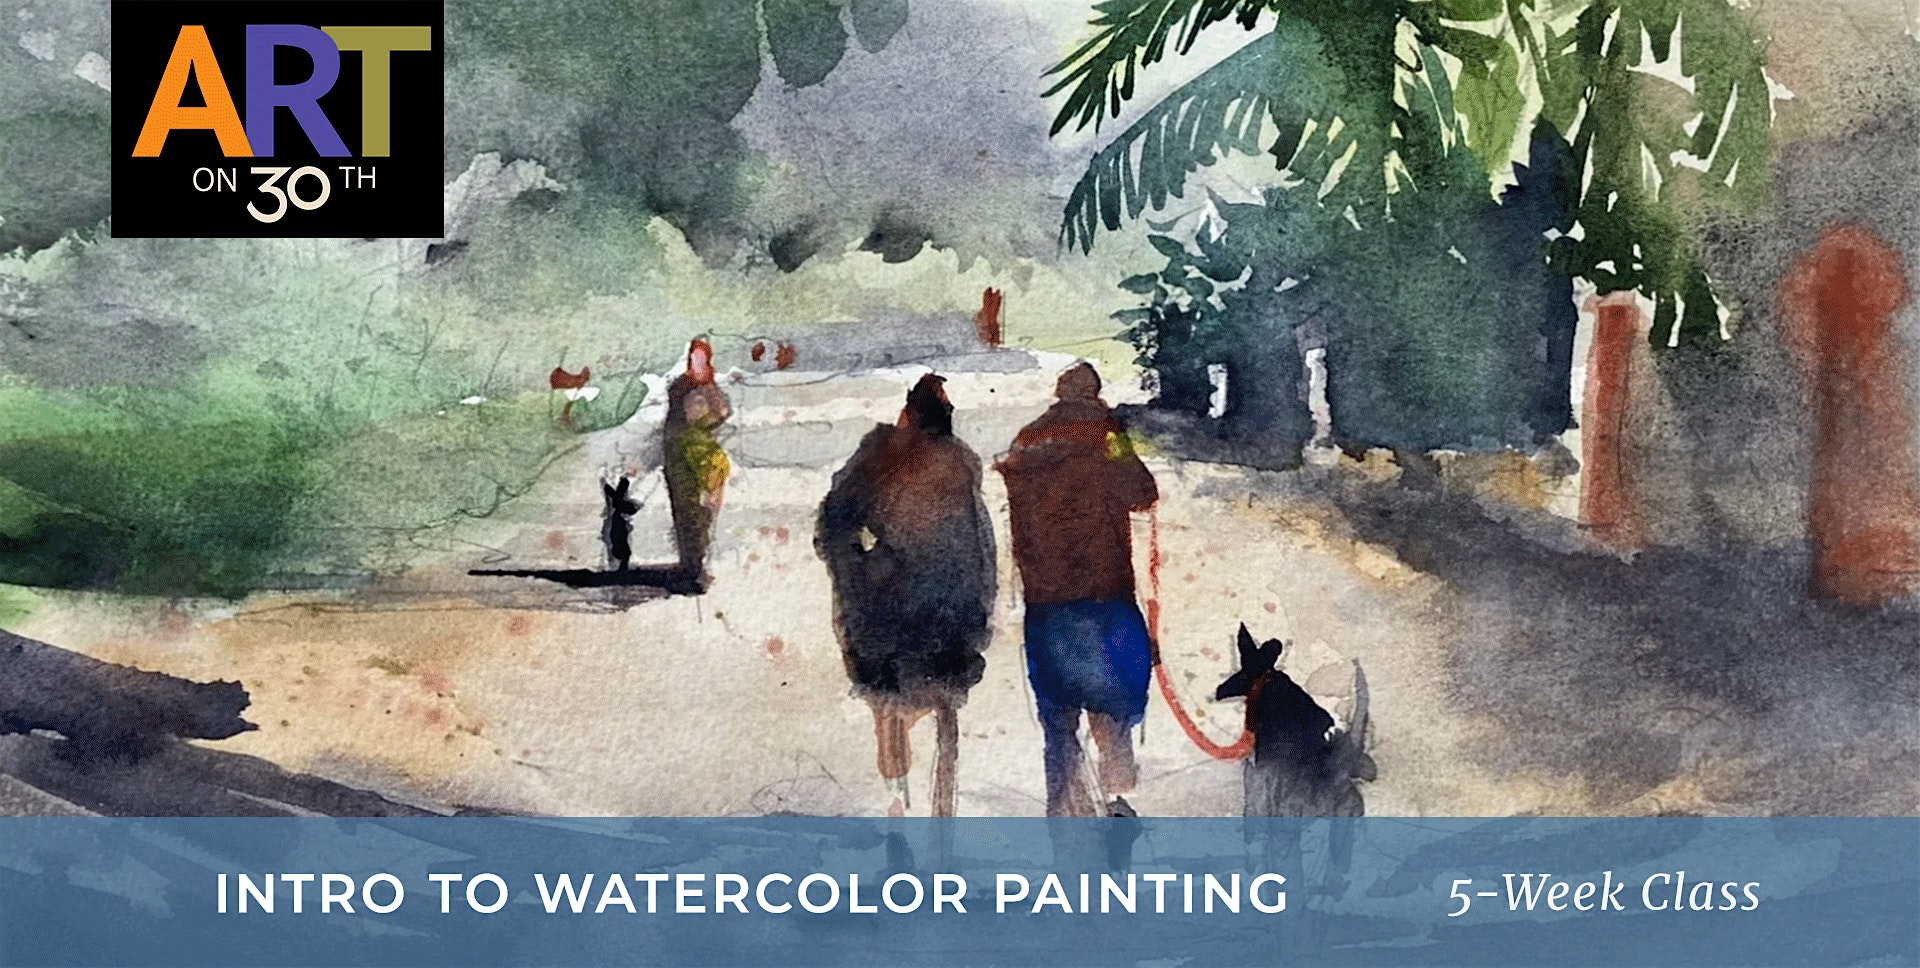 TUE PM - Intro to Watercolor Painting with Gabriel Stockton